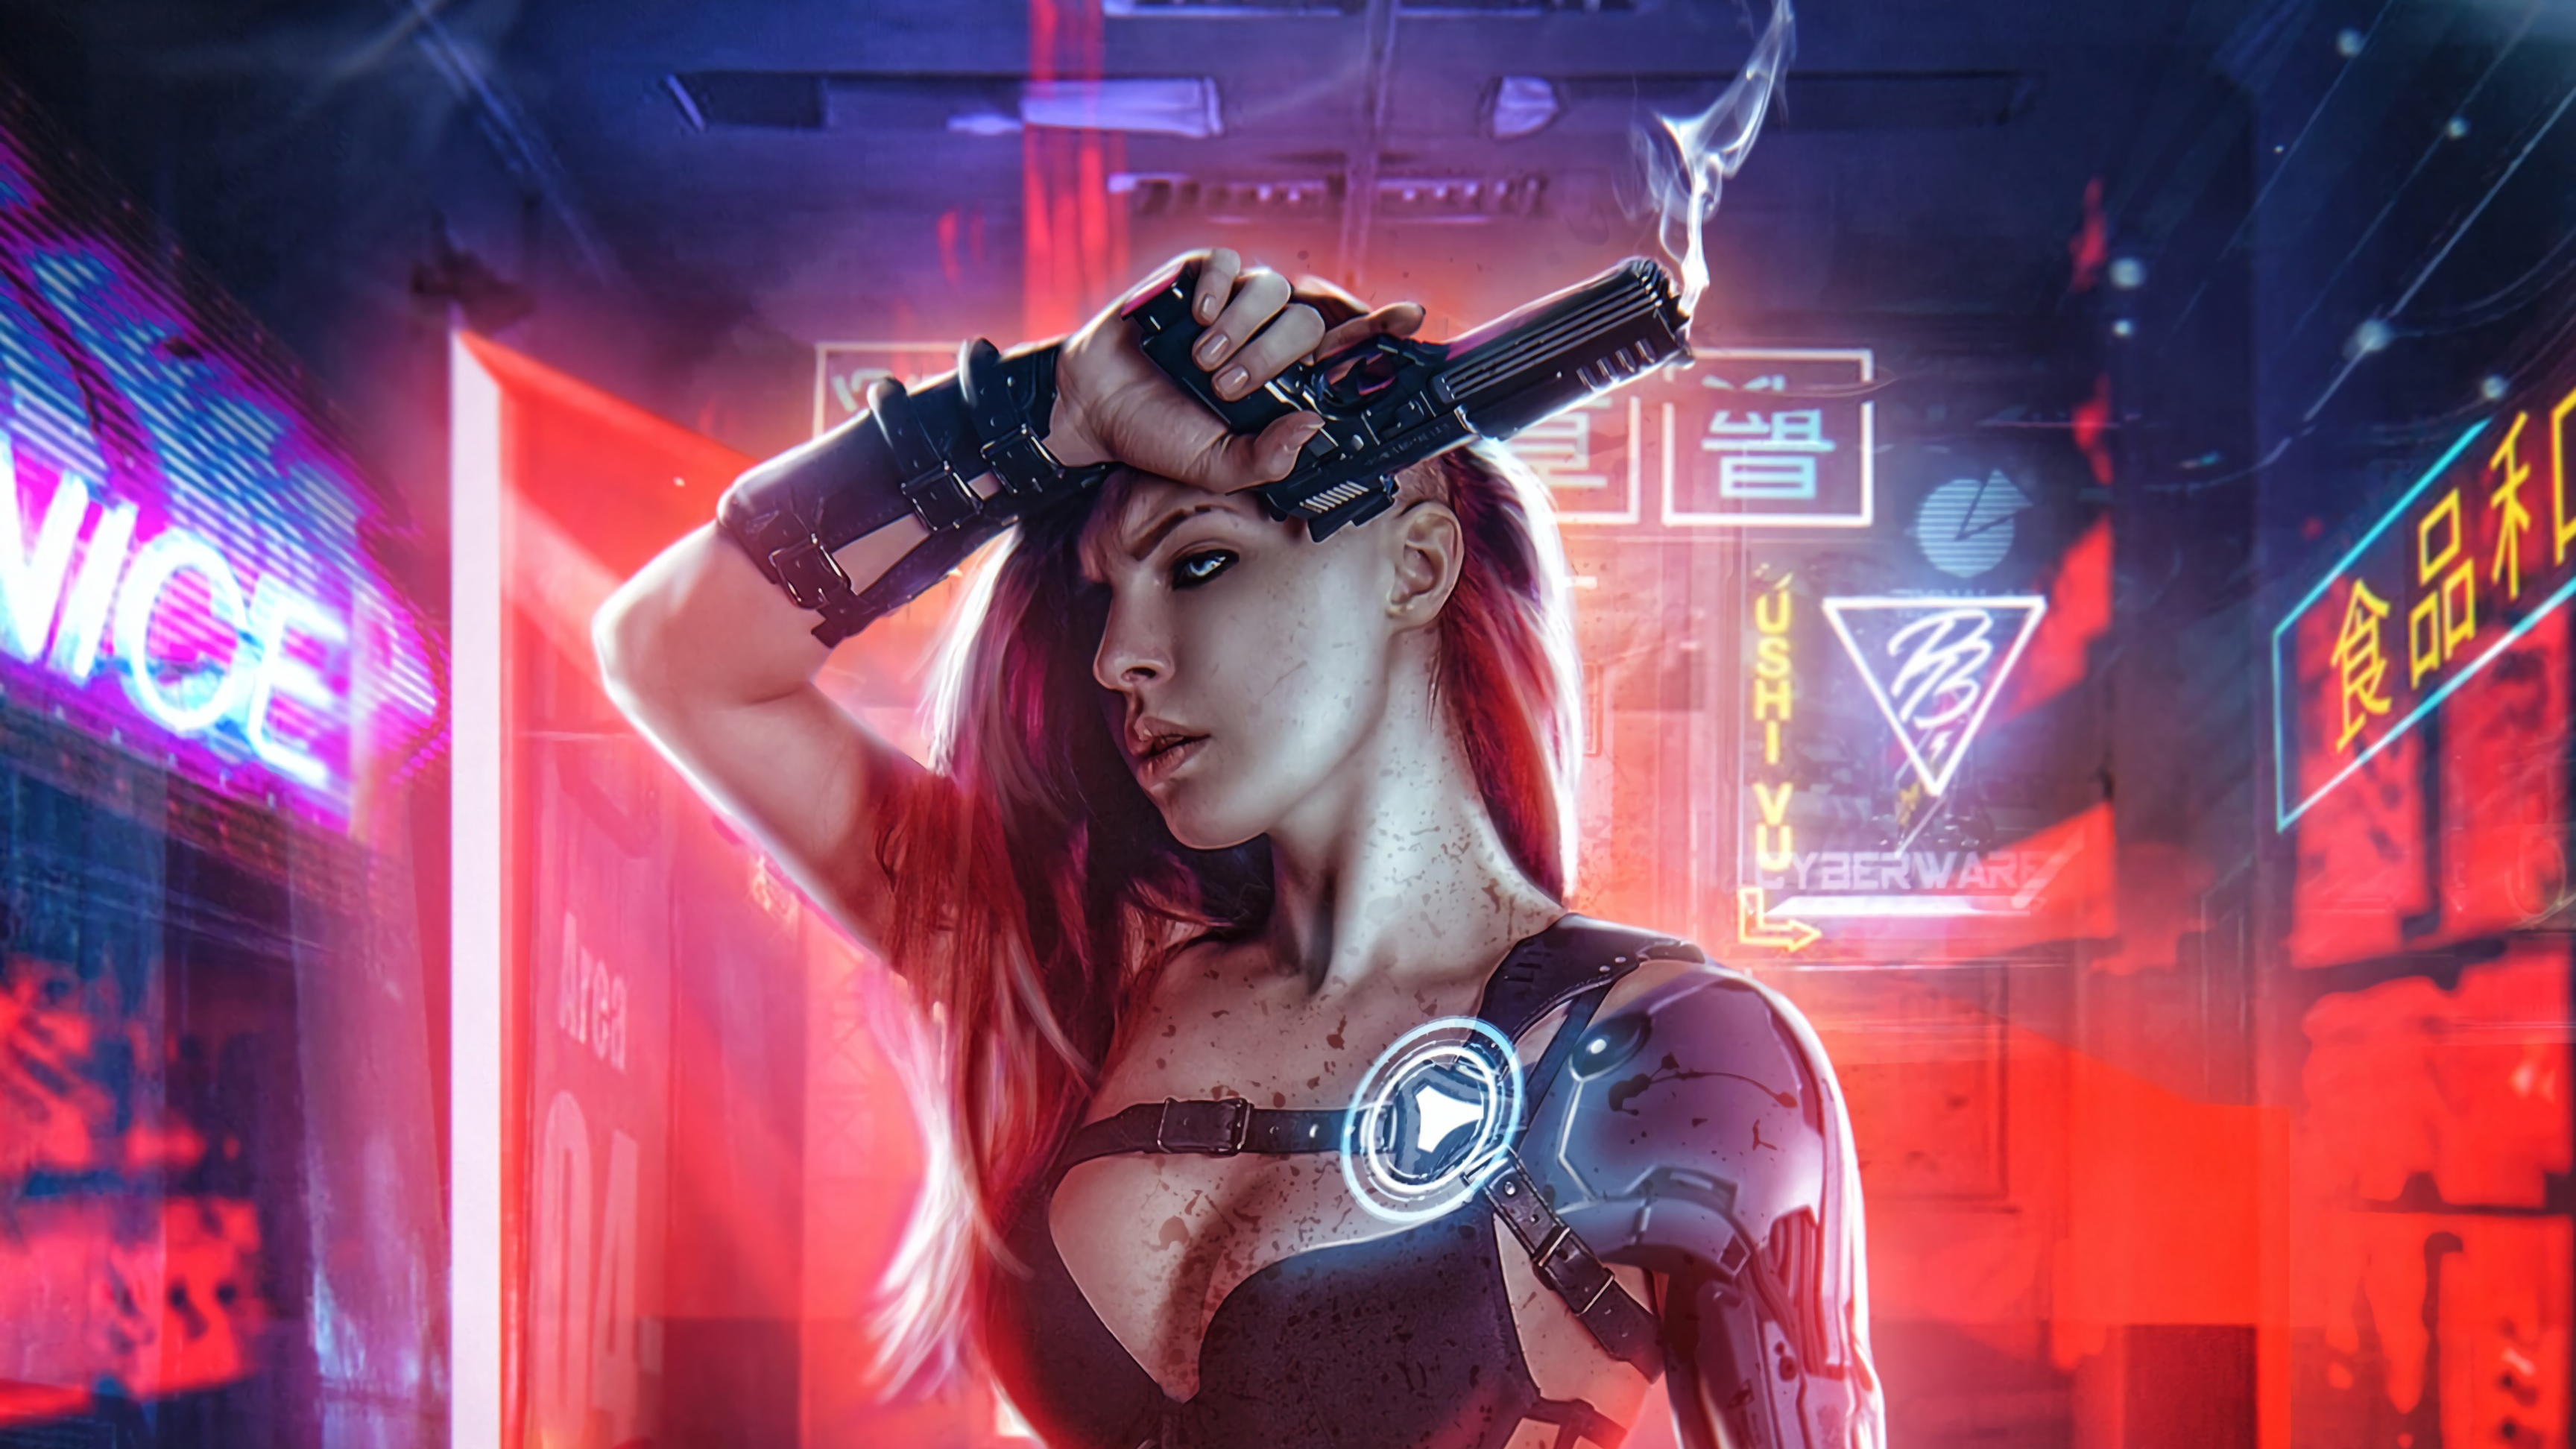 Cyberpunk Girl With Gun 4k Hd Artist 4k Wallpapers Images Backgrounds Photos And Pictures 4990